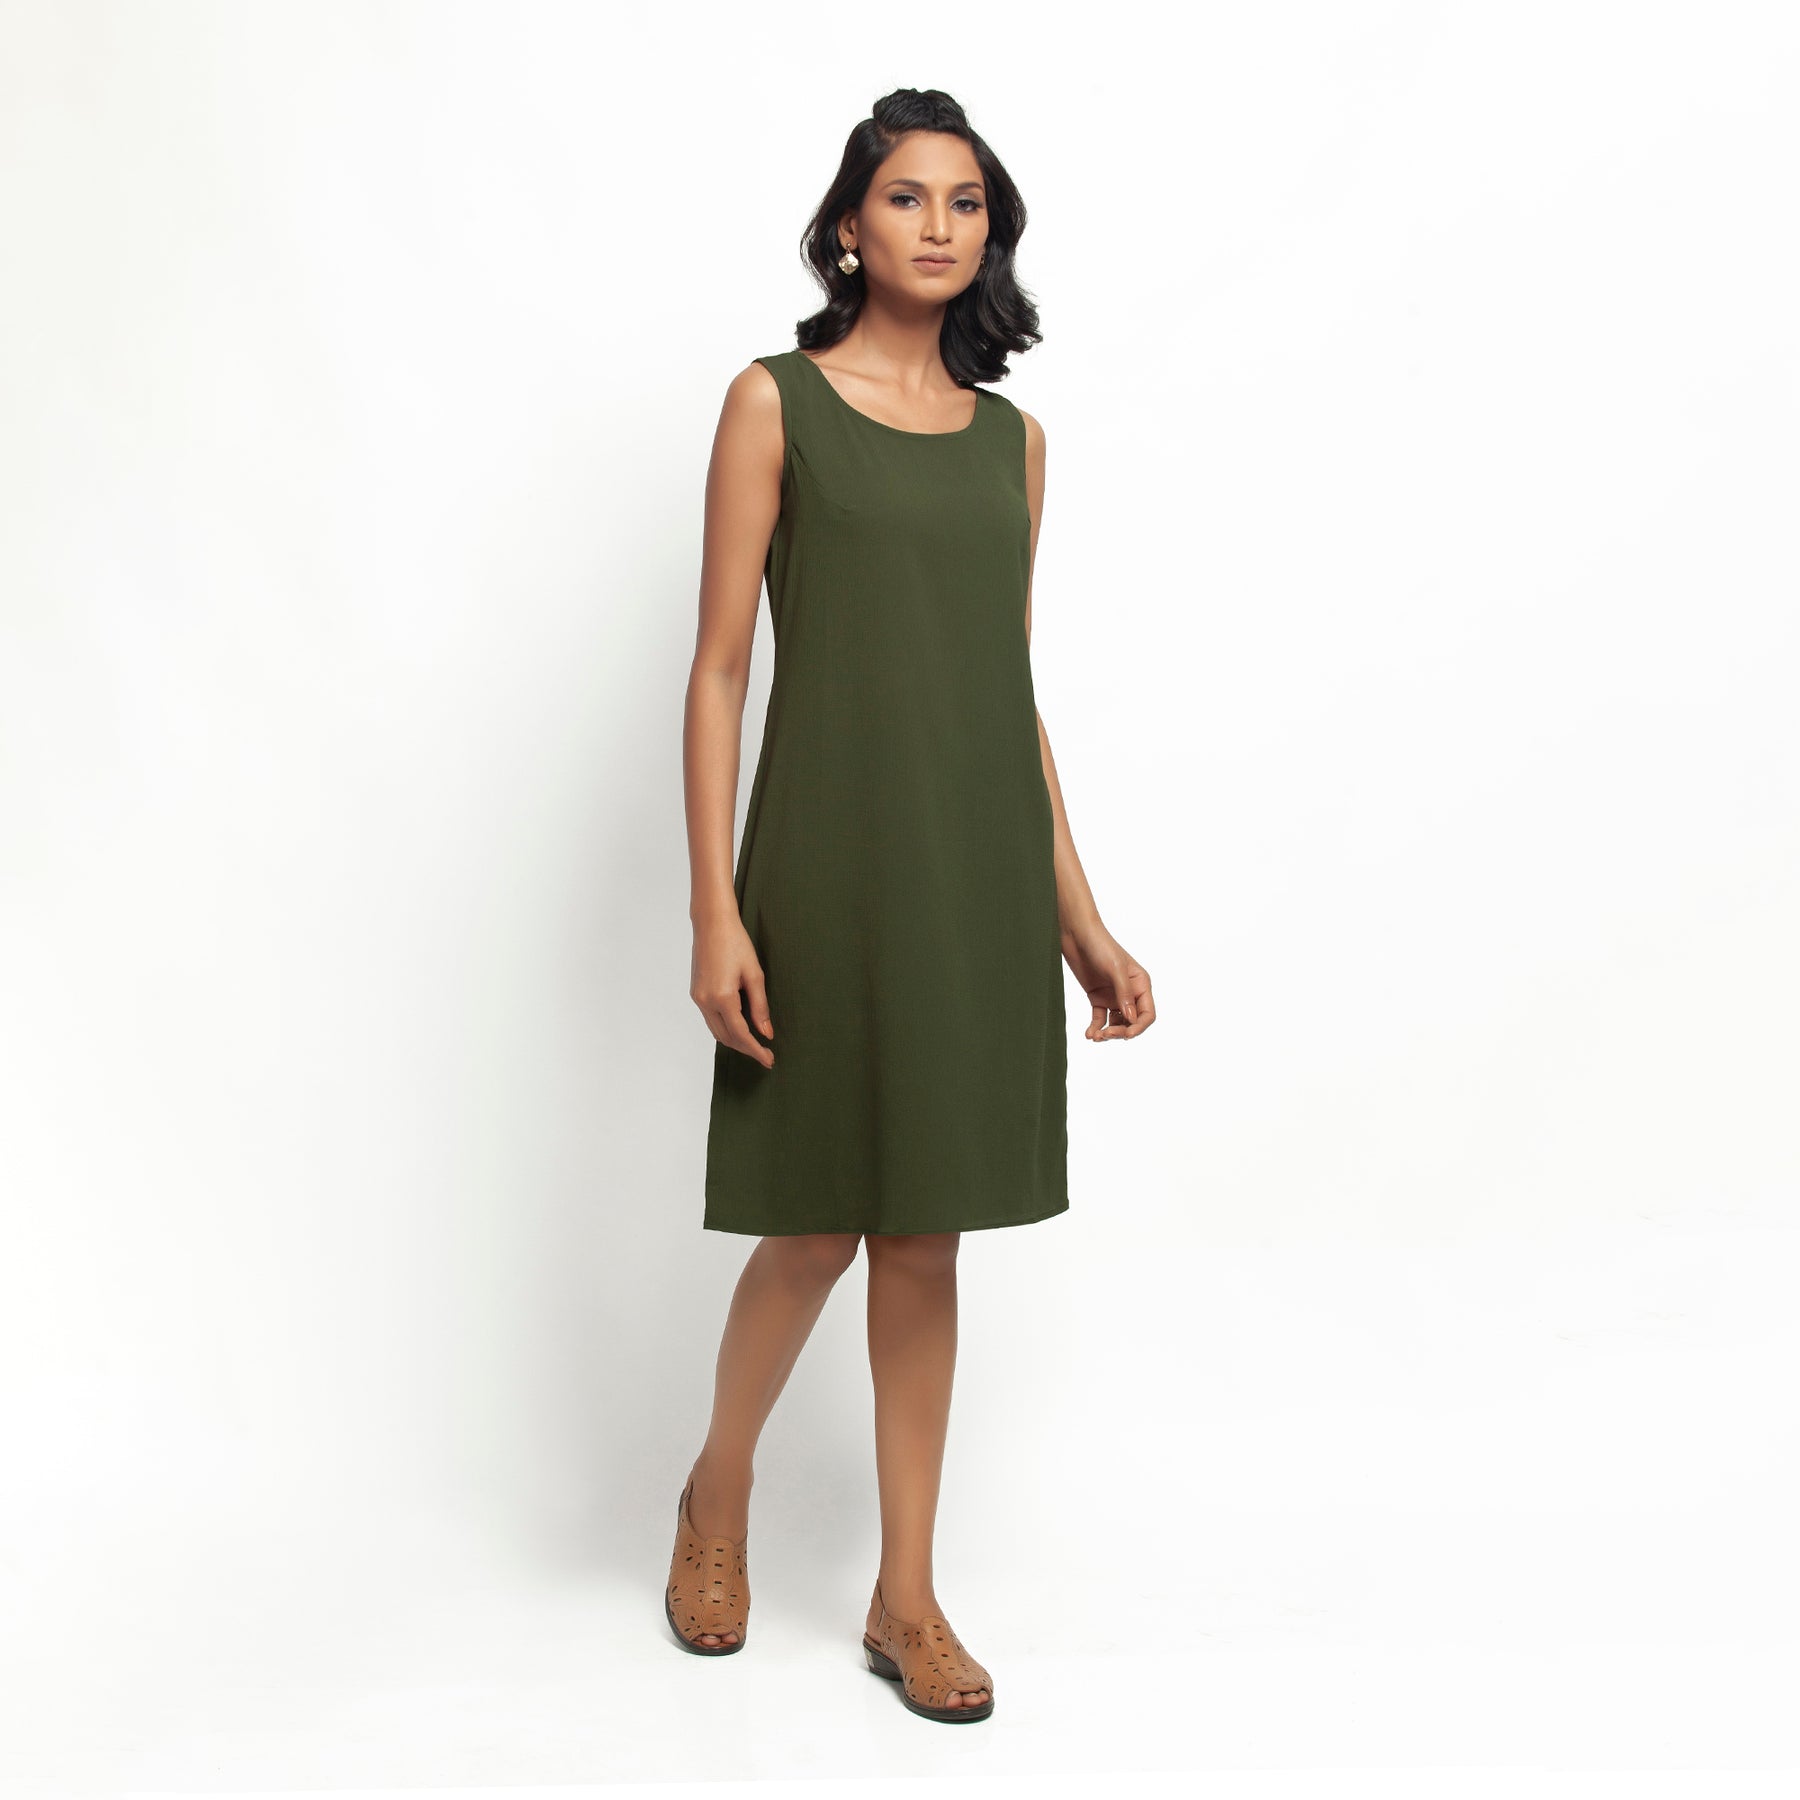 Green Crepe Without Sleeves Dress